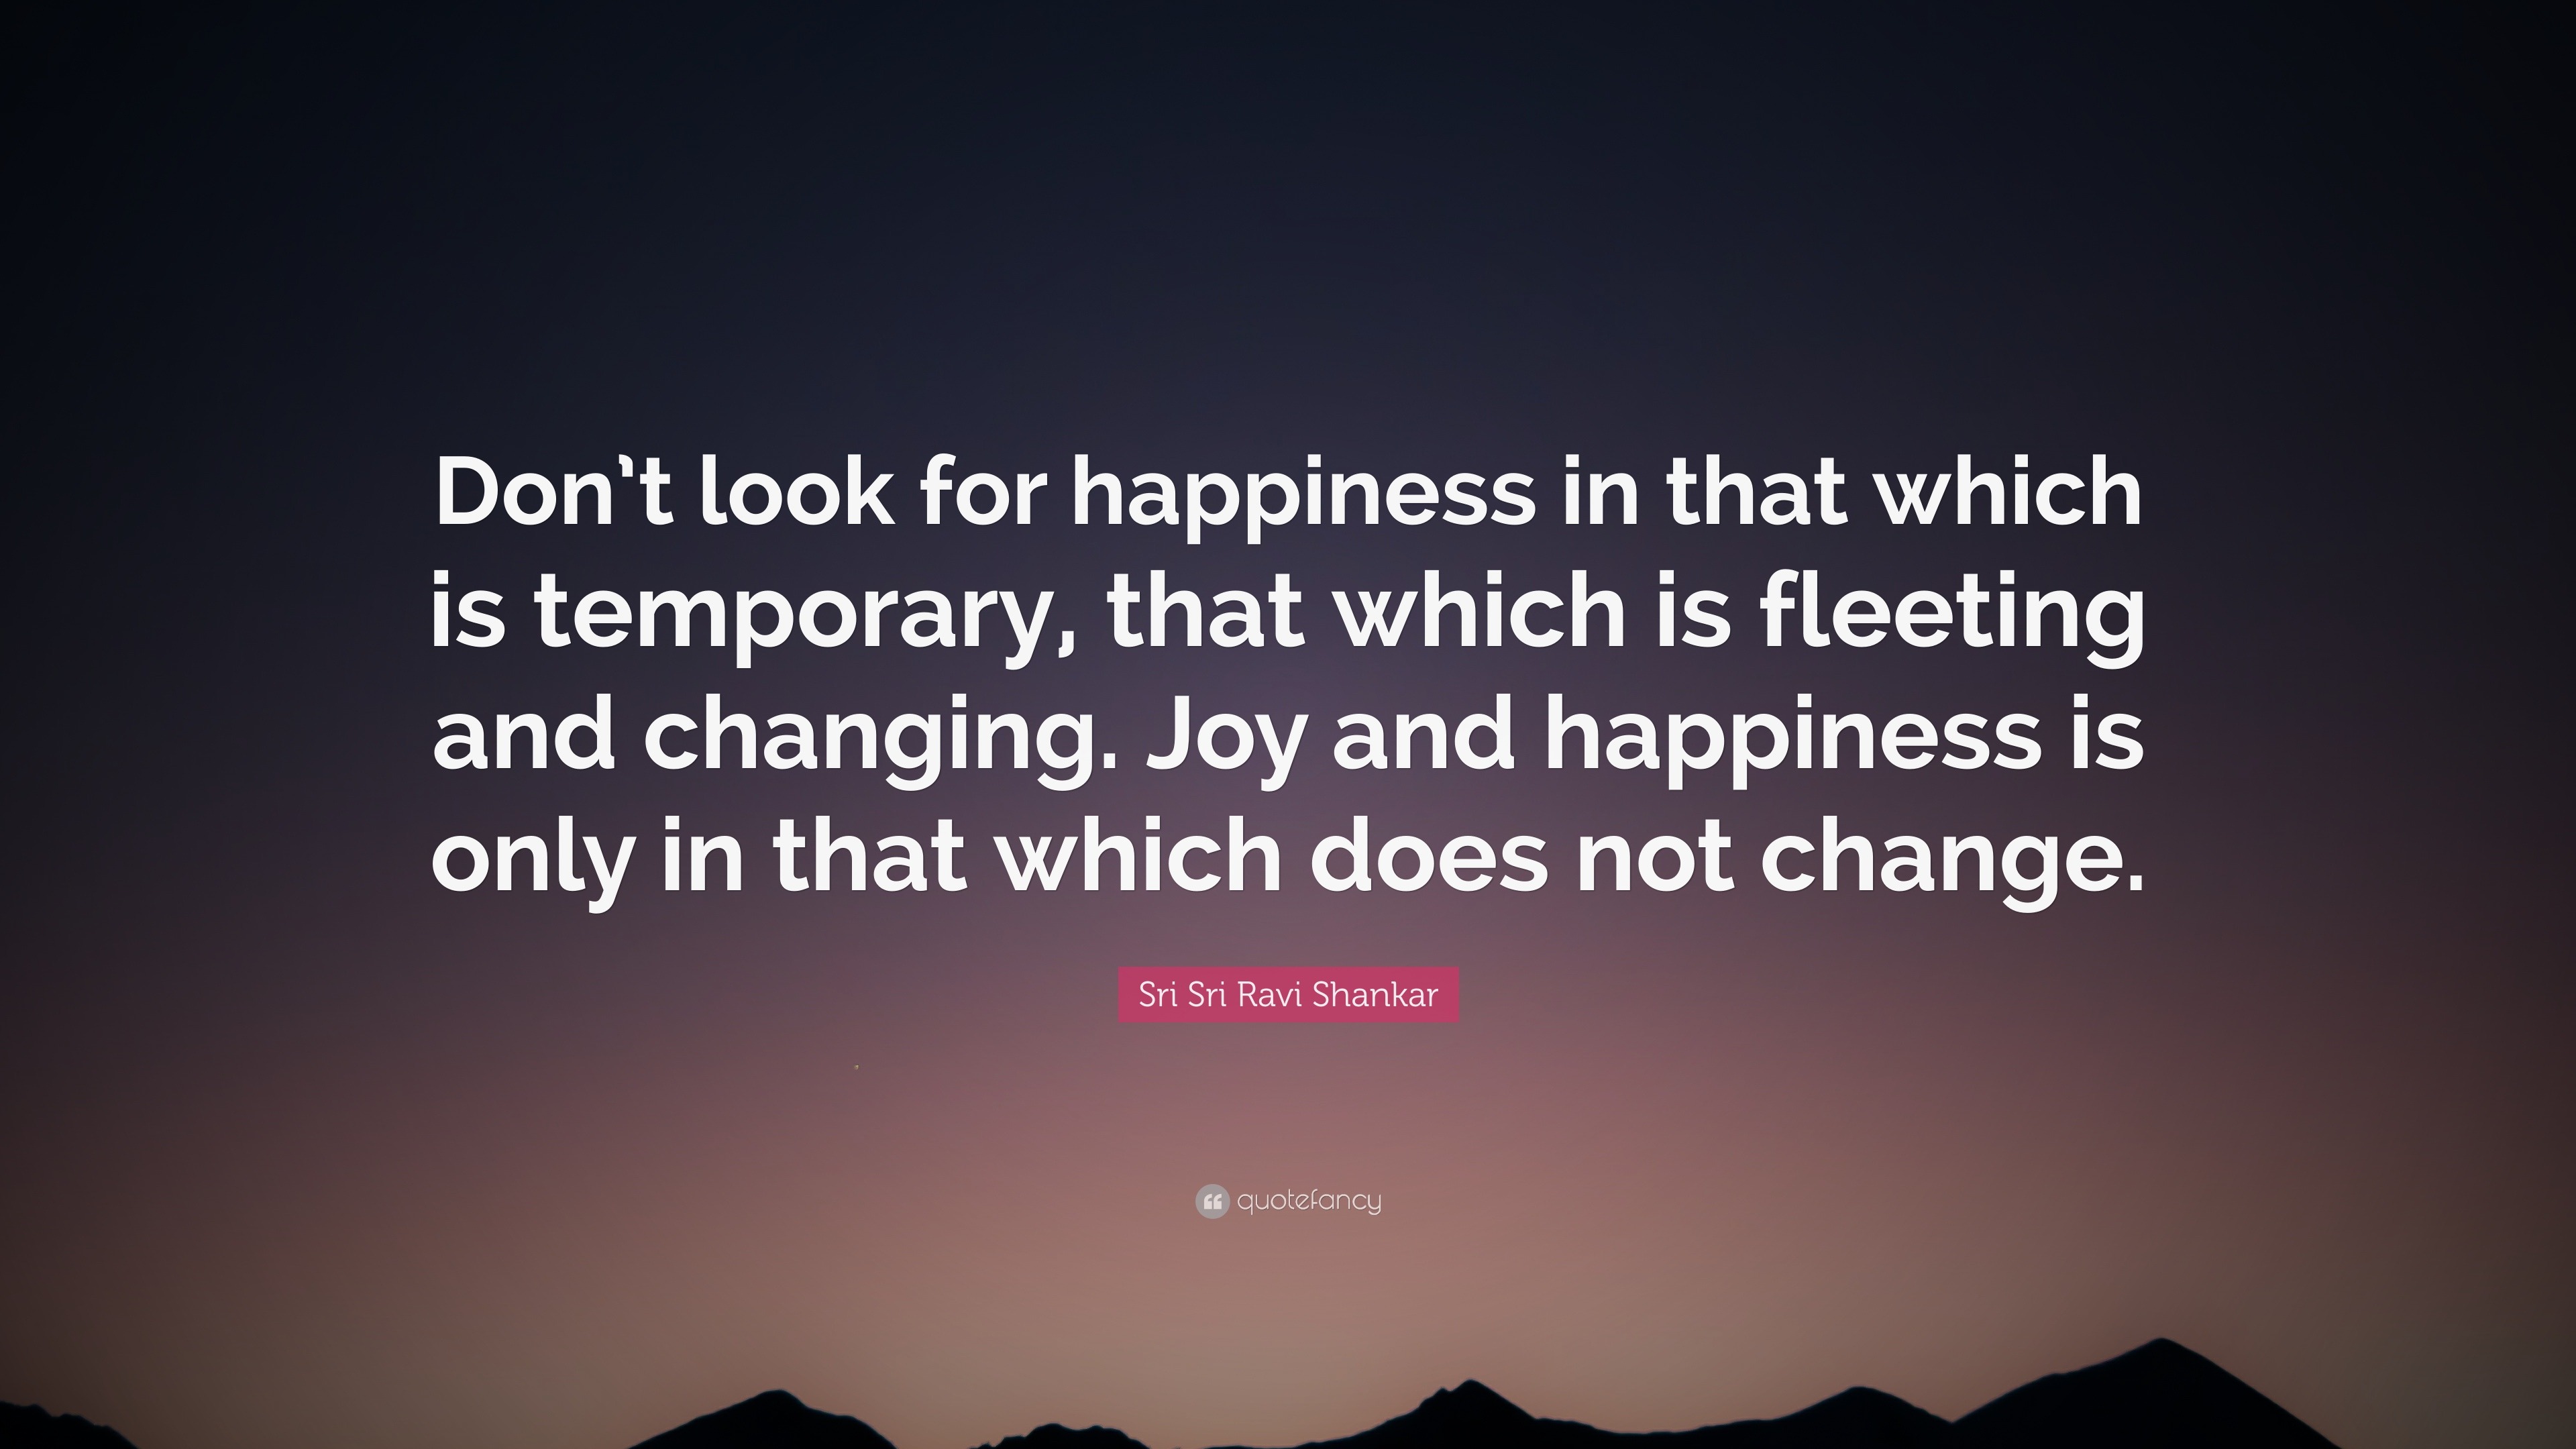 Sri Sri Ravi Shankar Quote: “Don’t look for happiness in that which is ...